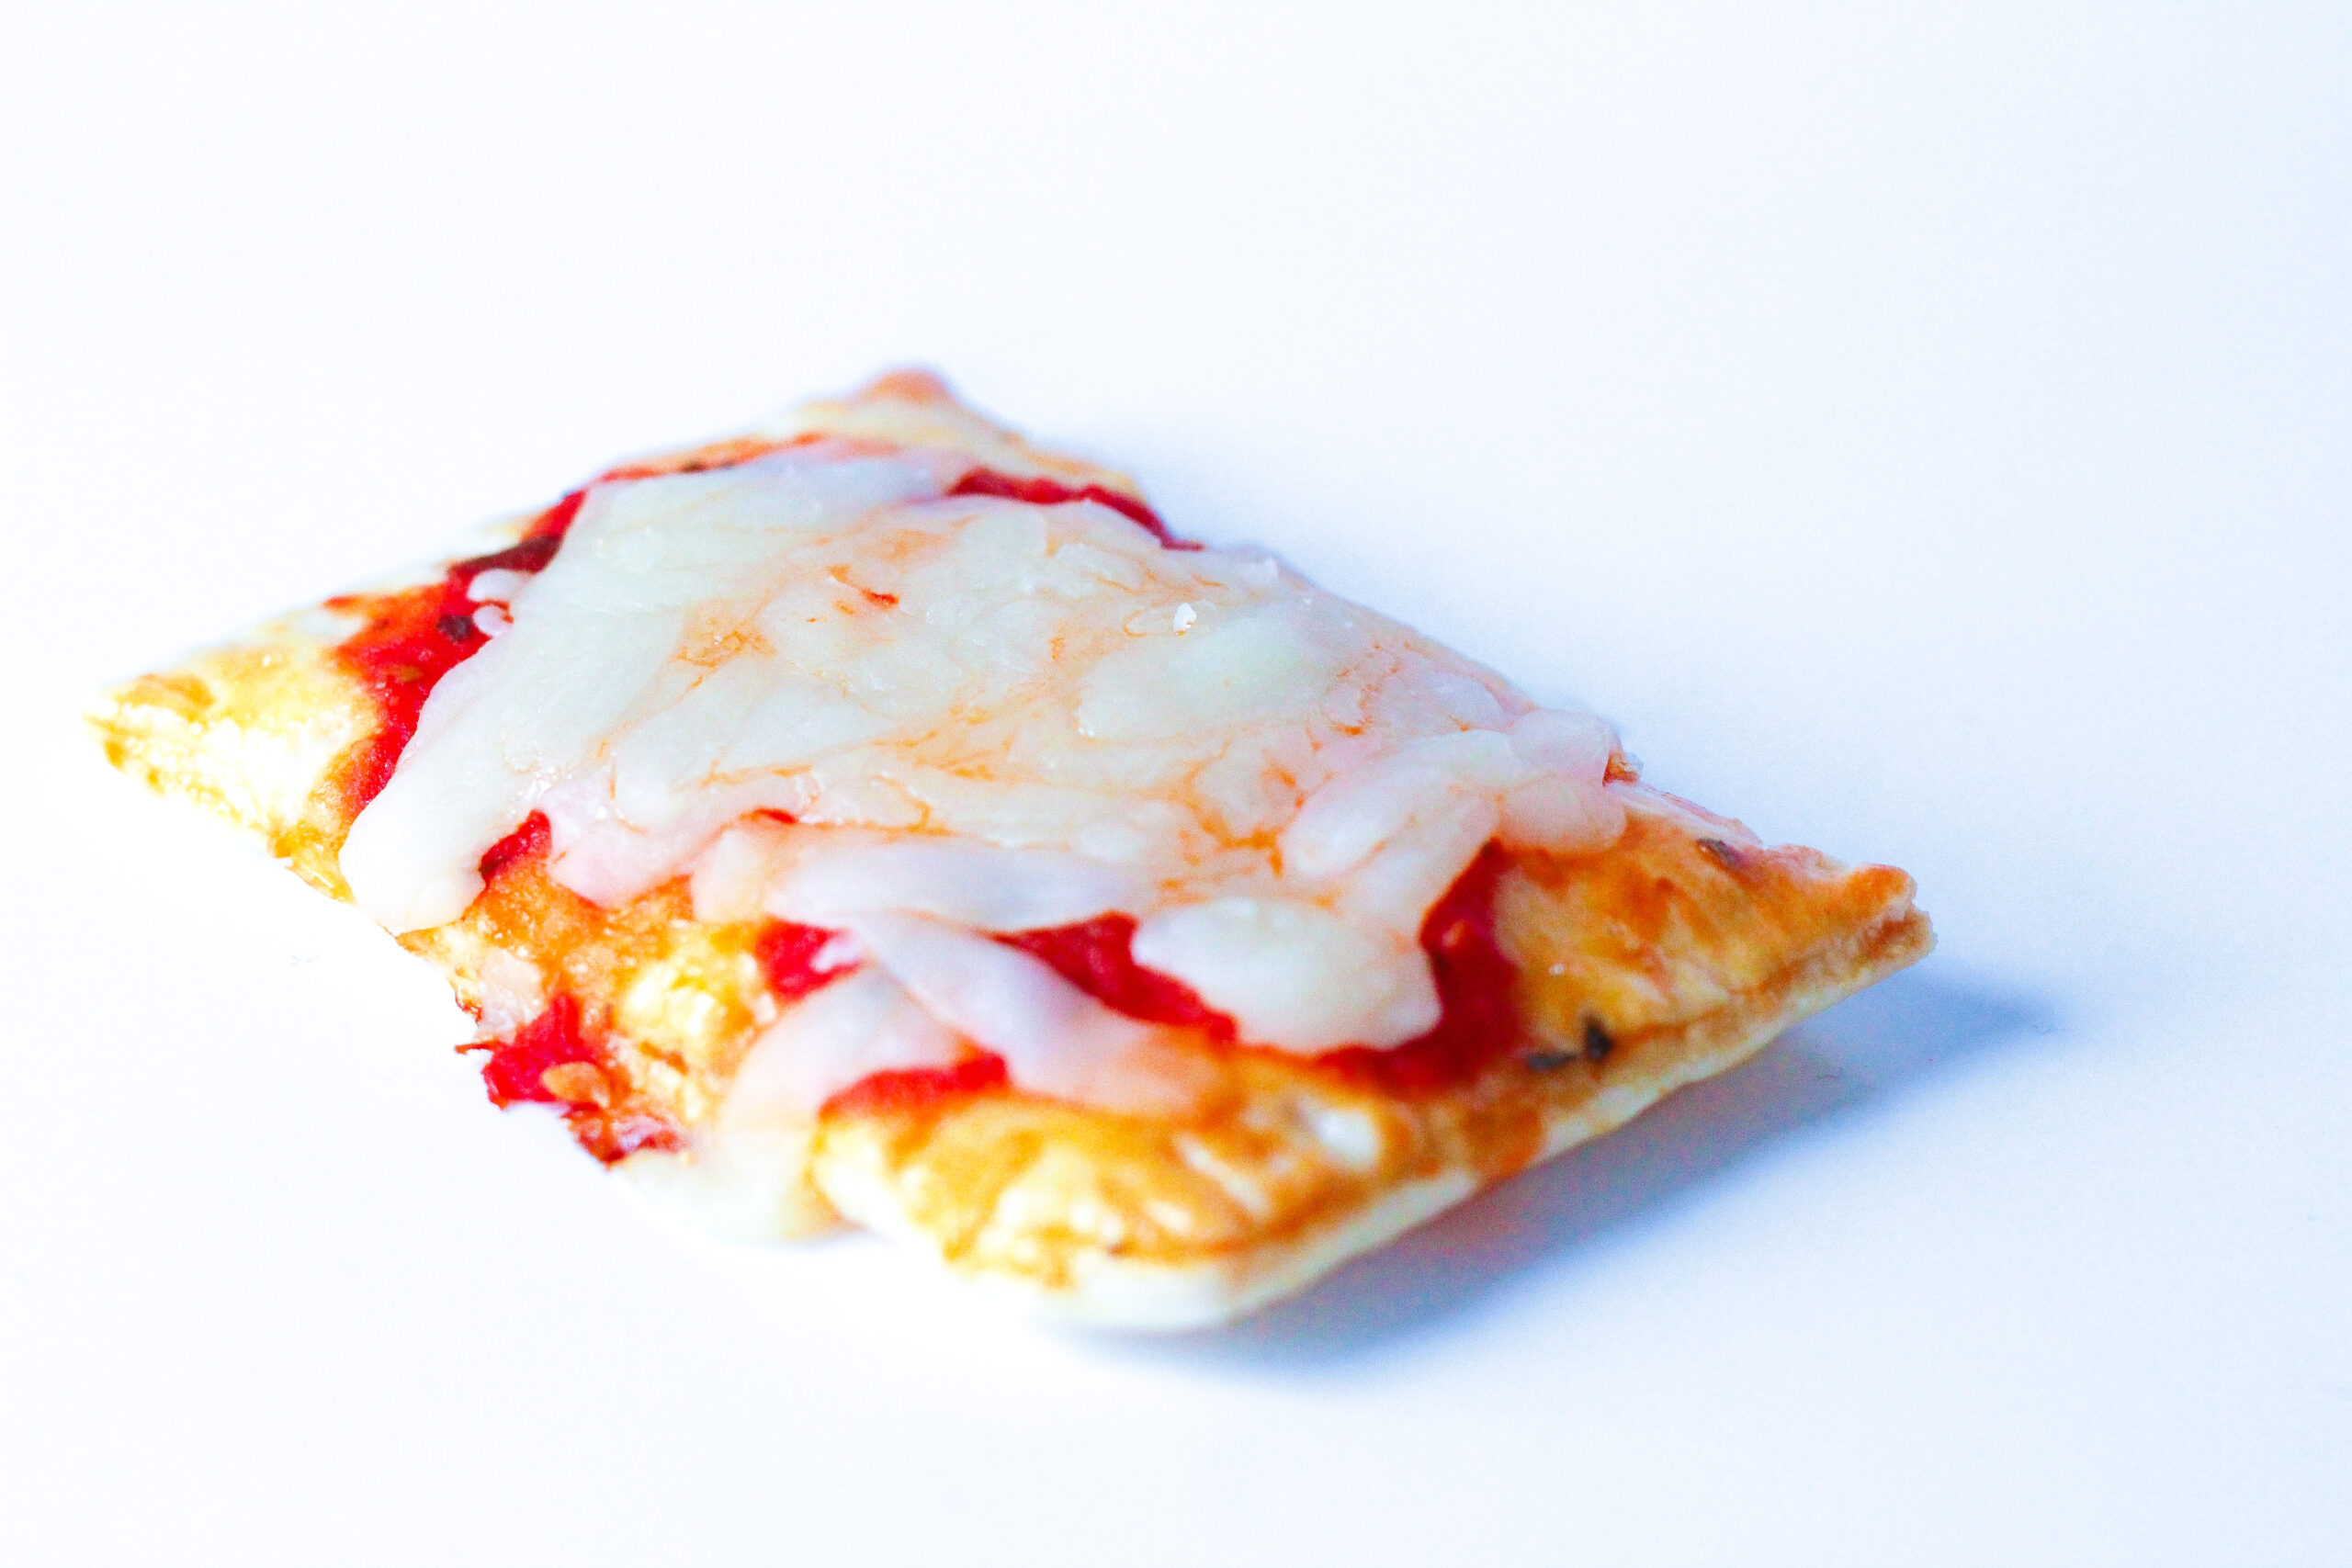 Close up of a pizza poptart on a white surface. A golden flakey crust with fork imprints around the edges, topped with red pizza sauce and white mozzerella cheese